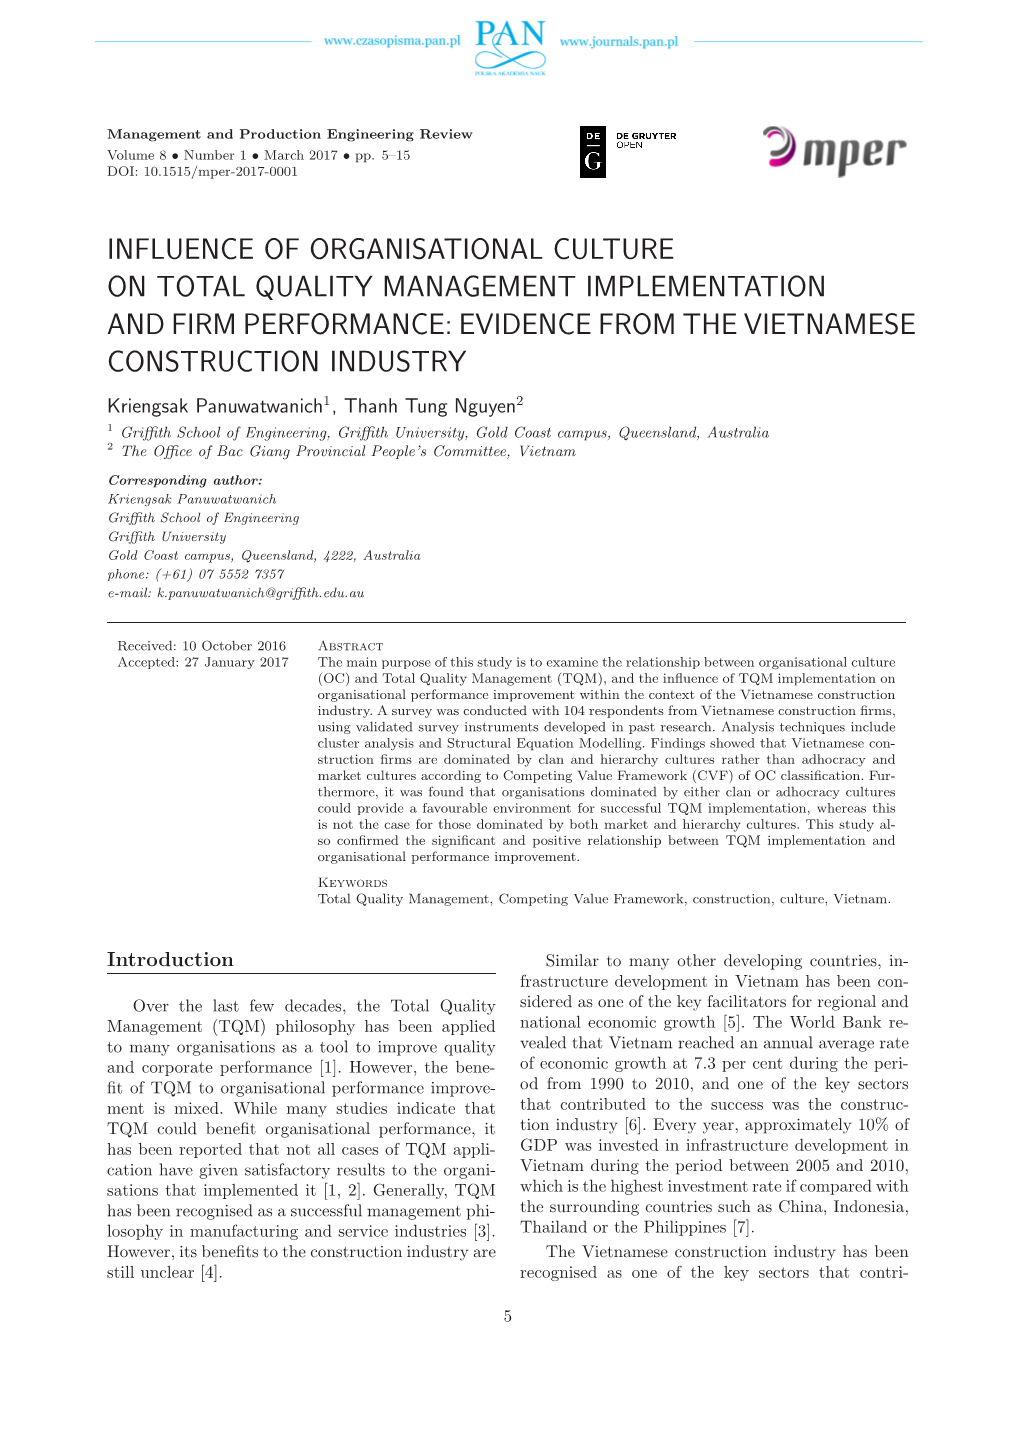 Influence of Organisational Culture on Total Quality Management Implementation and Firm Performance: Evidence from the Vietnamese Construction Industry